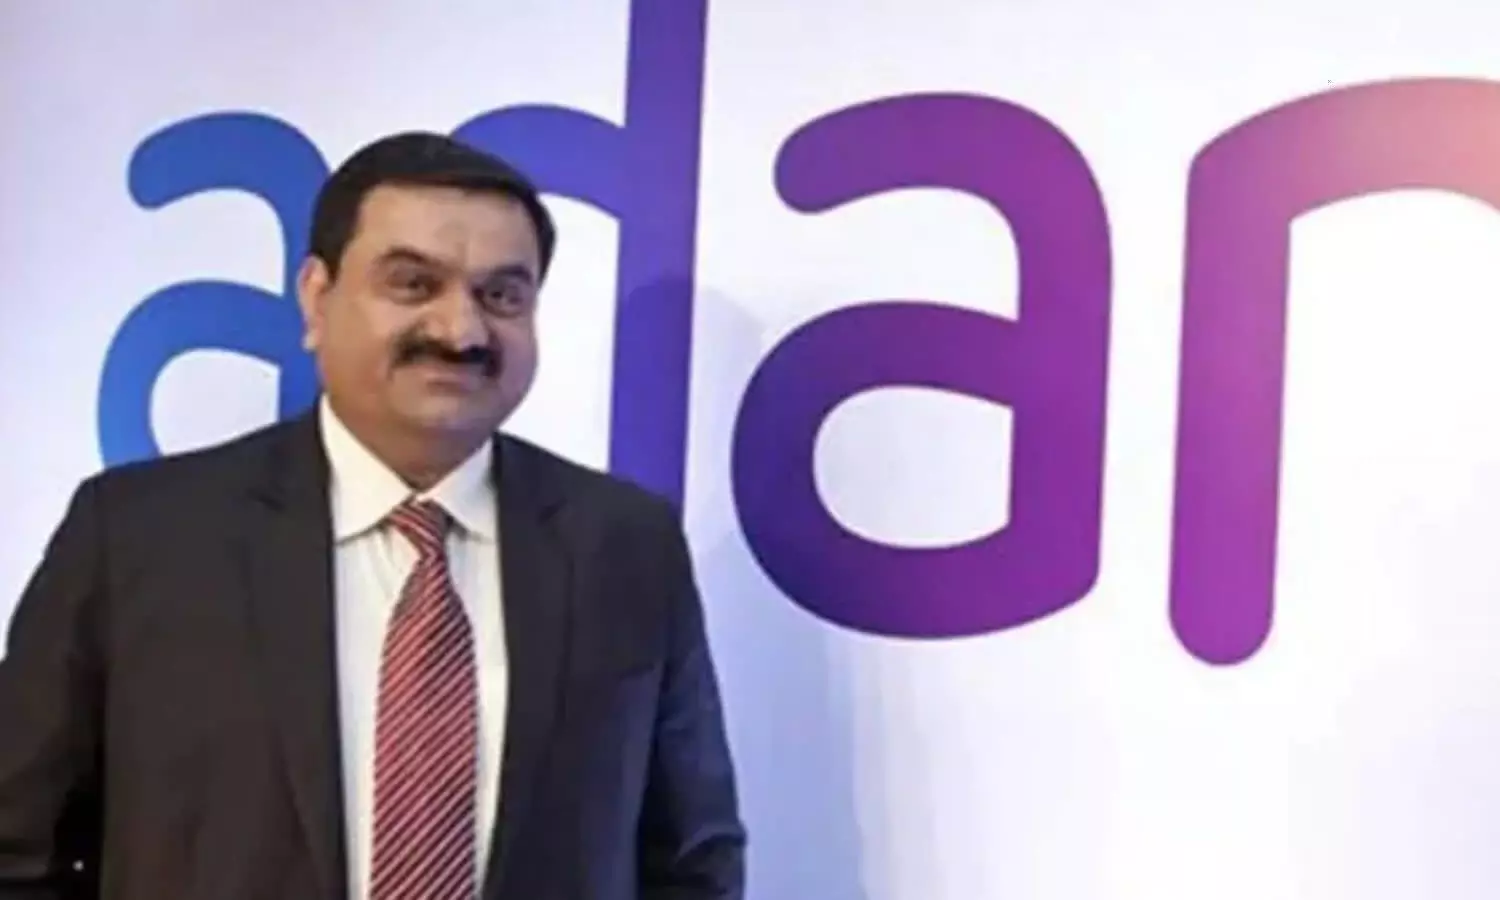 Adani is now preparing to challenge the countrys largest company Reliance Industries.